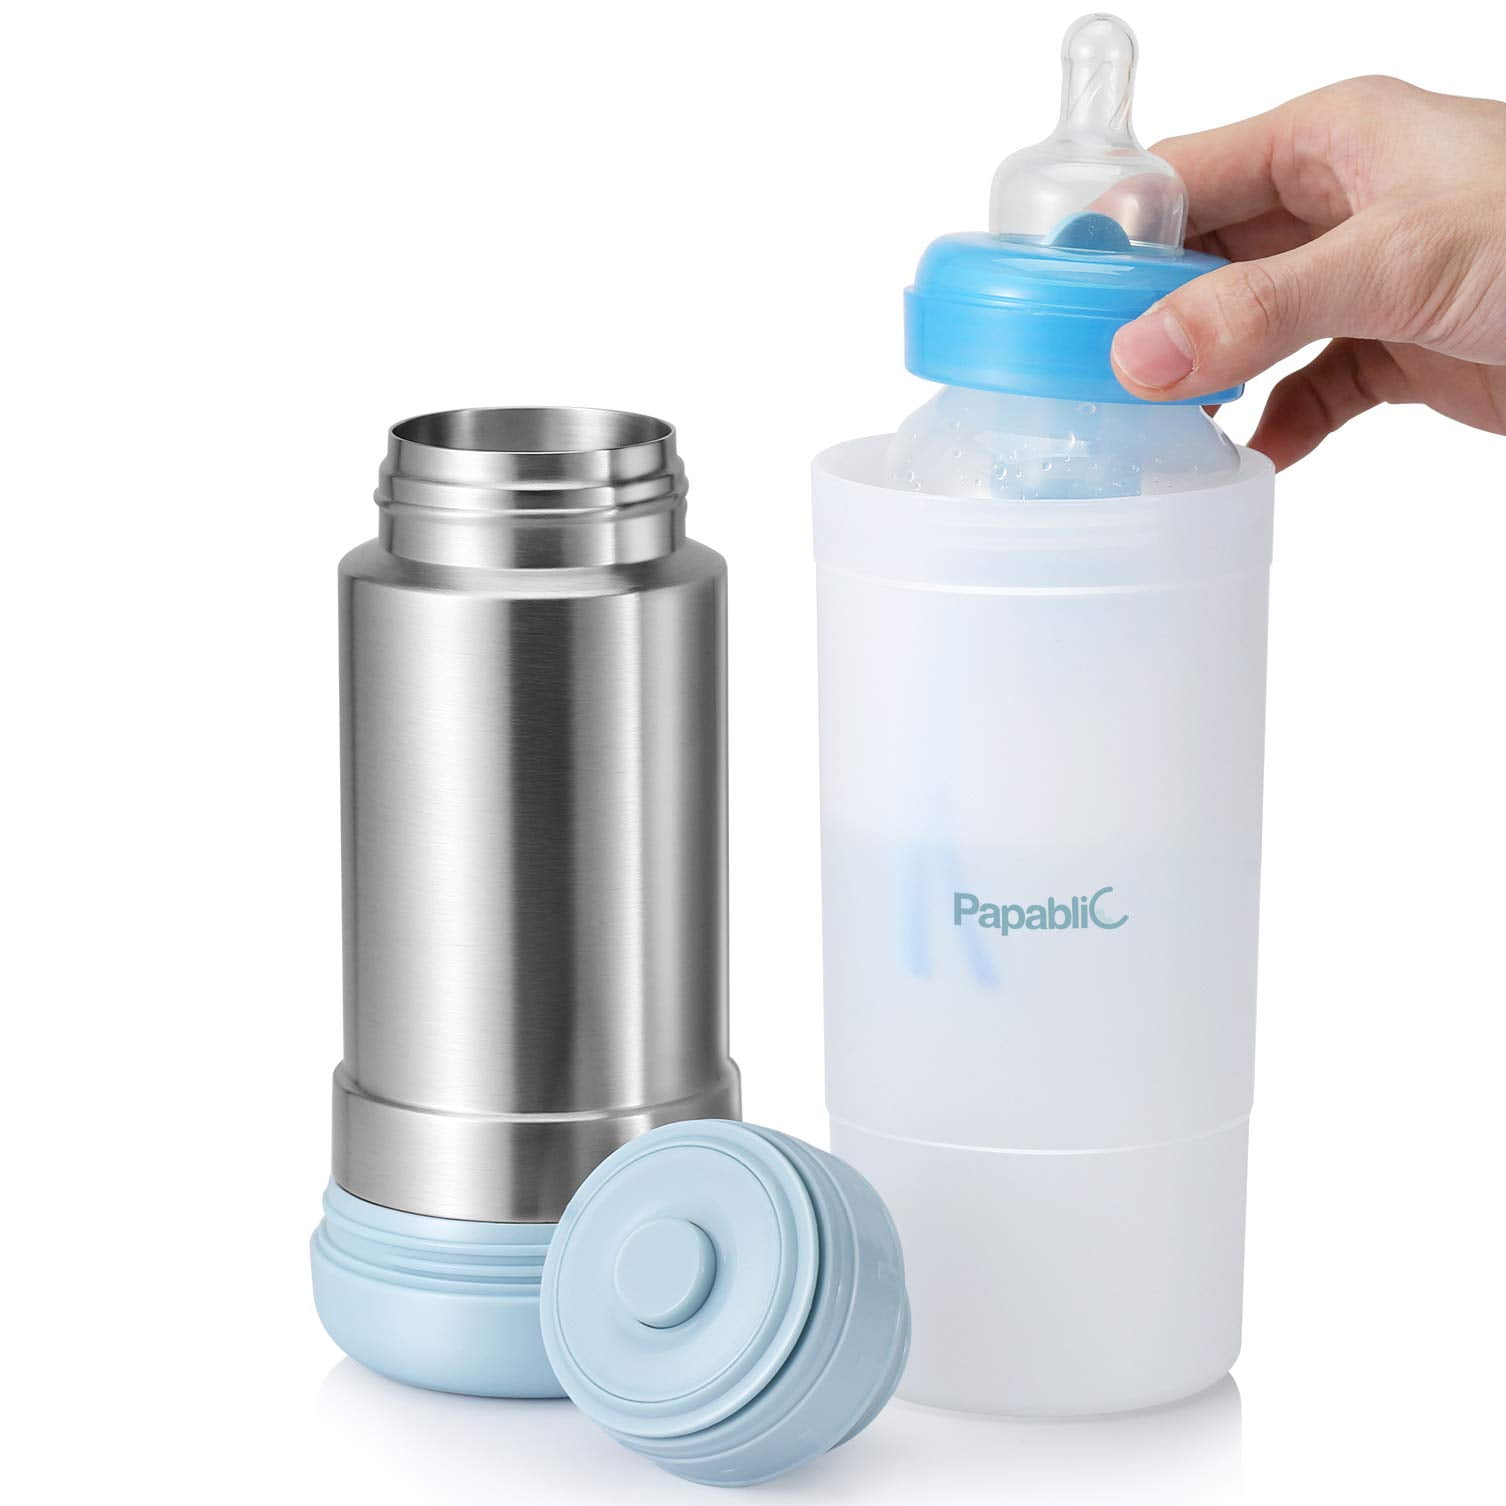 Papablic Formula One Step Bottle Warmer, Water Warmer for Baby Formula with  Smart Temperature Control